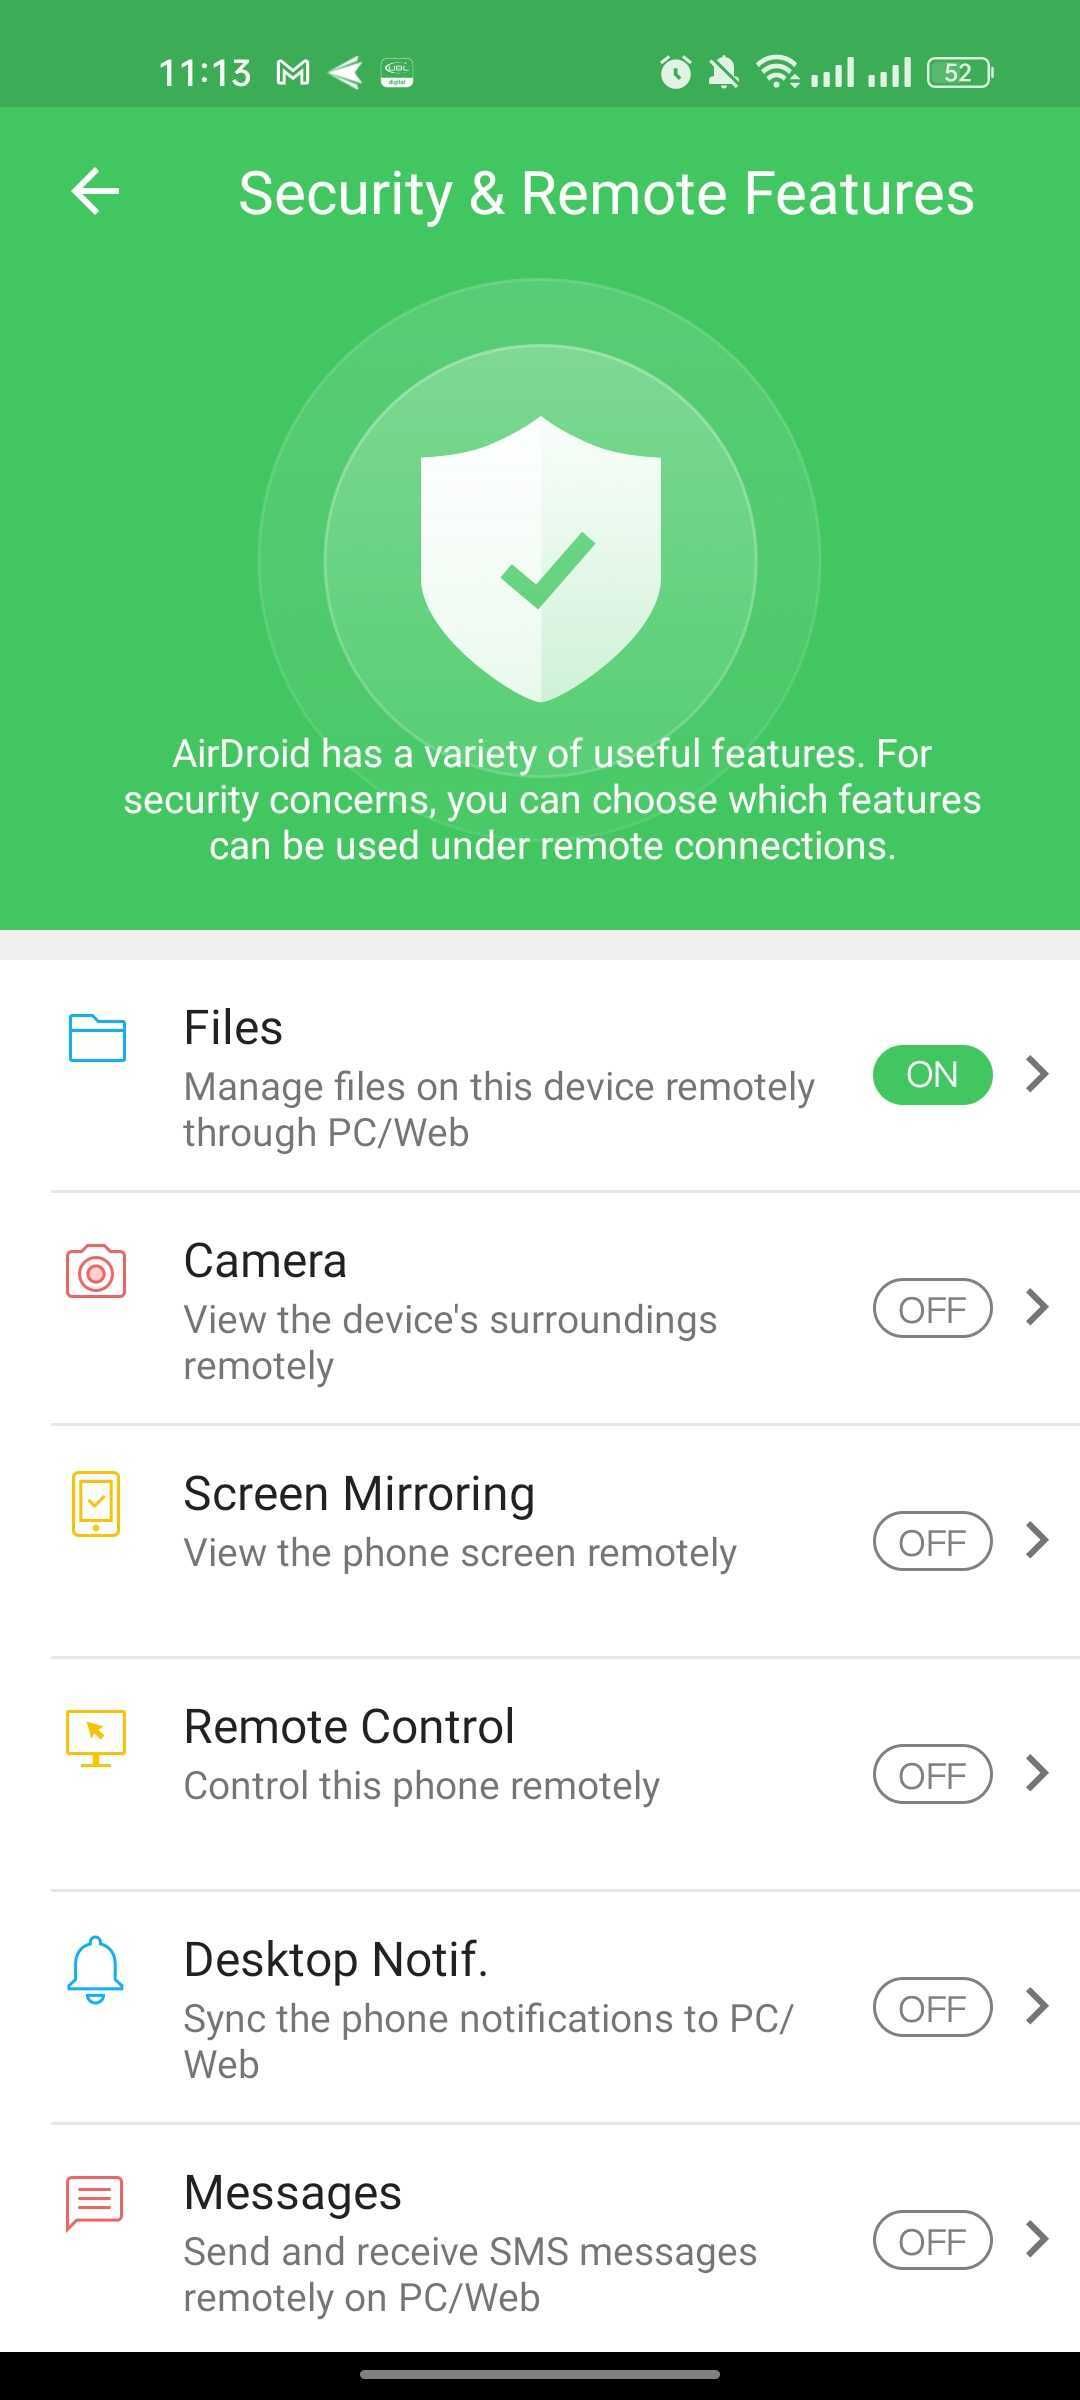 Enabling security and remote features in Airdroid